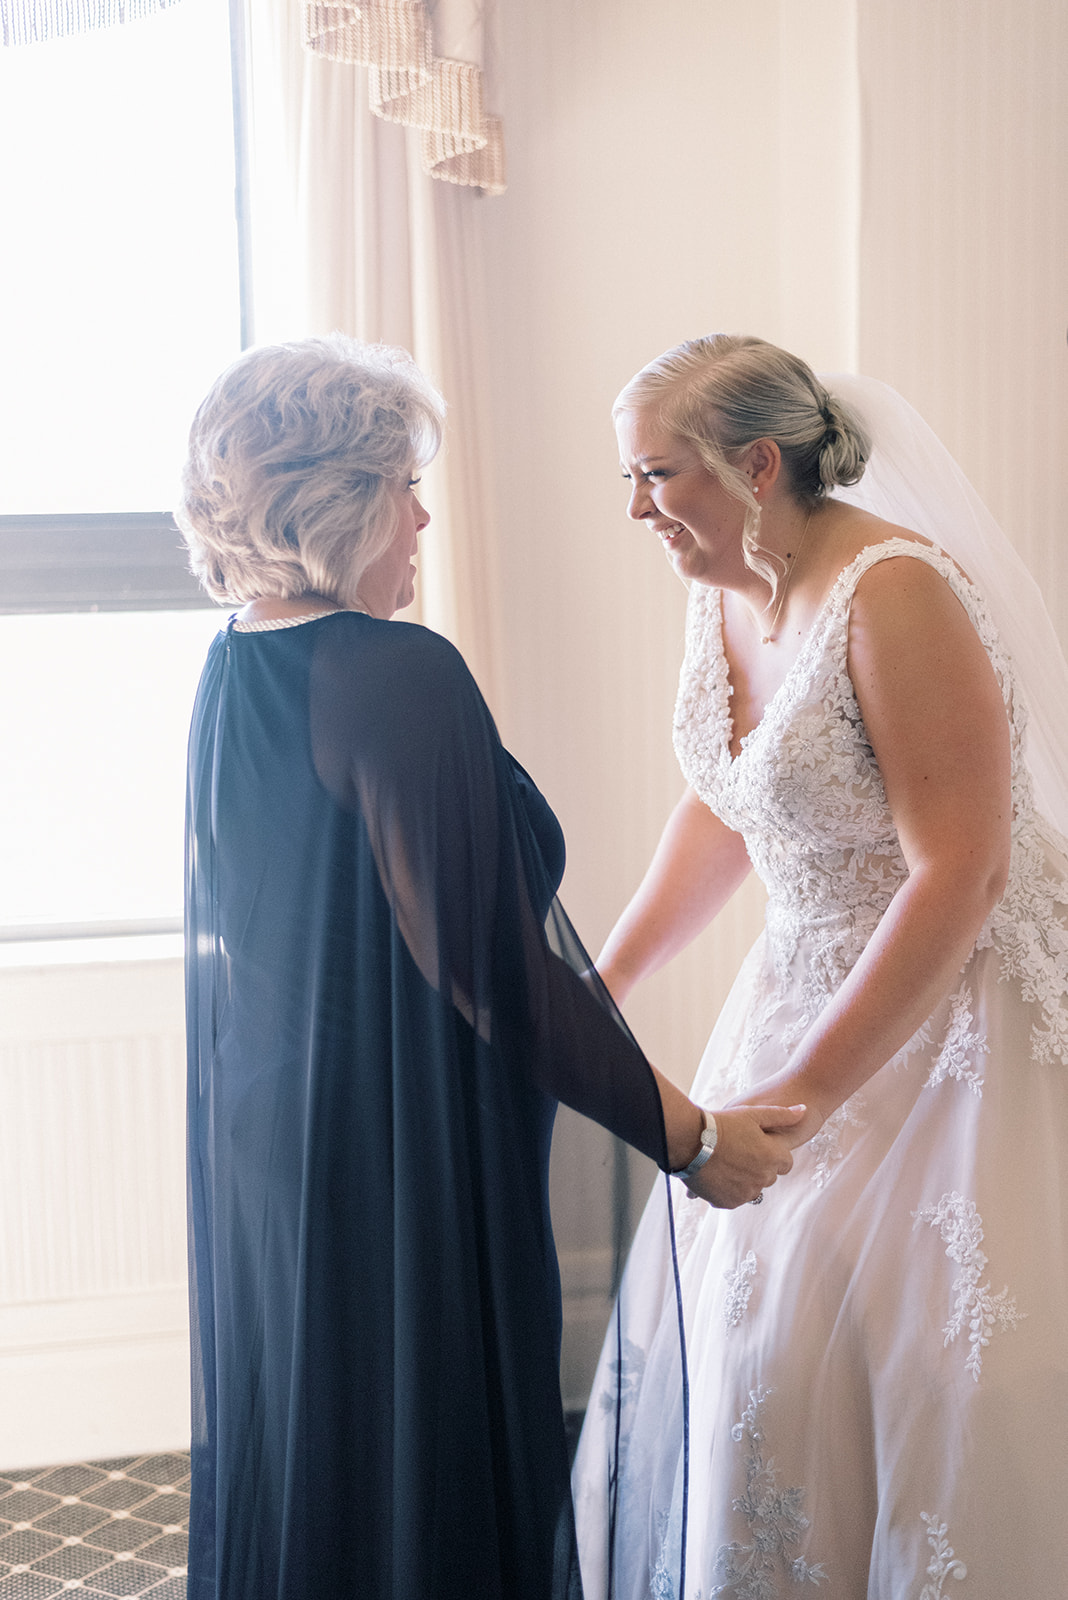 Pennsylvania wedding photographer captures bride holding mother's hands and smiling